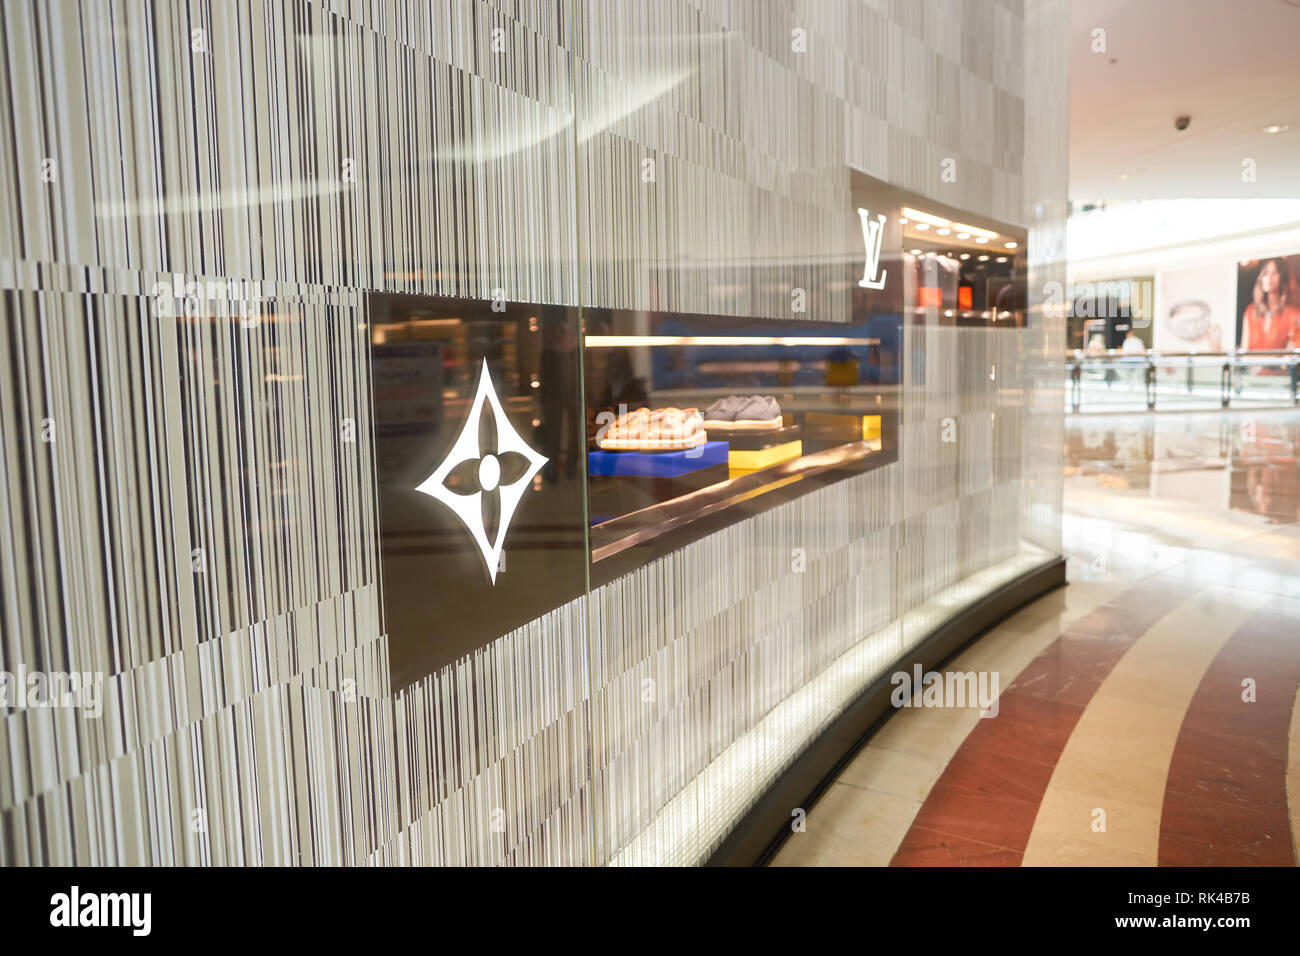 KUALA LUMPUR, MALAYSIA - MAY 09, 2016: inside of Louis Vuitton store. Louis  Vuitton Malletier, commonly referred to as Louis Vuitton, or shortened to  Stock Photo - Alamy